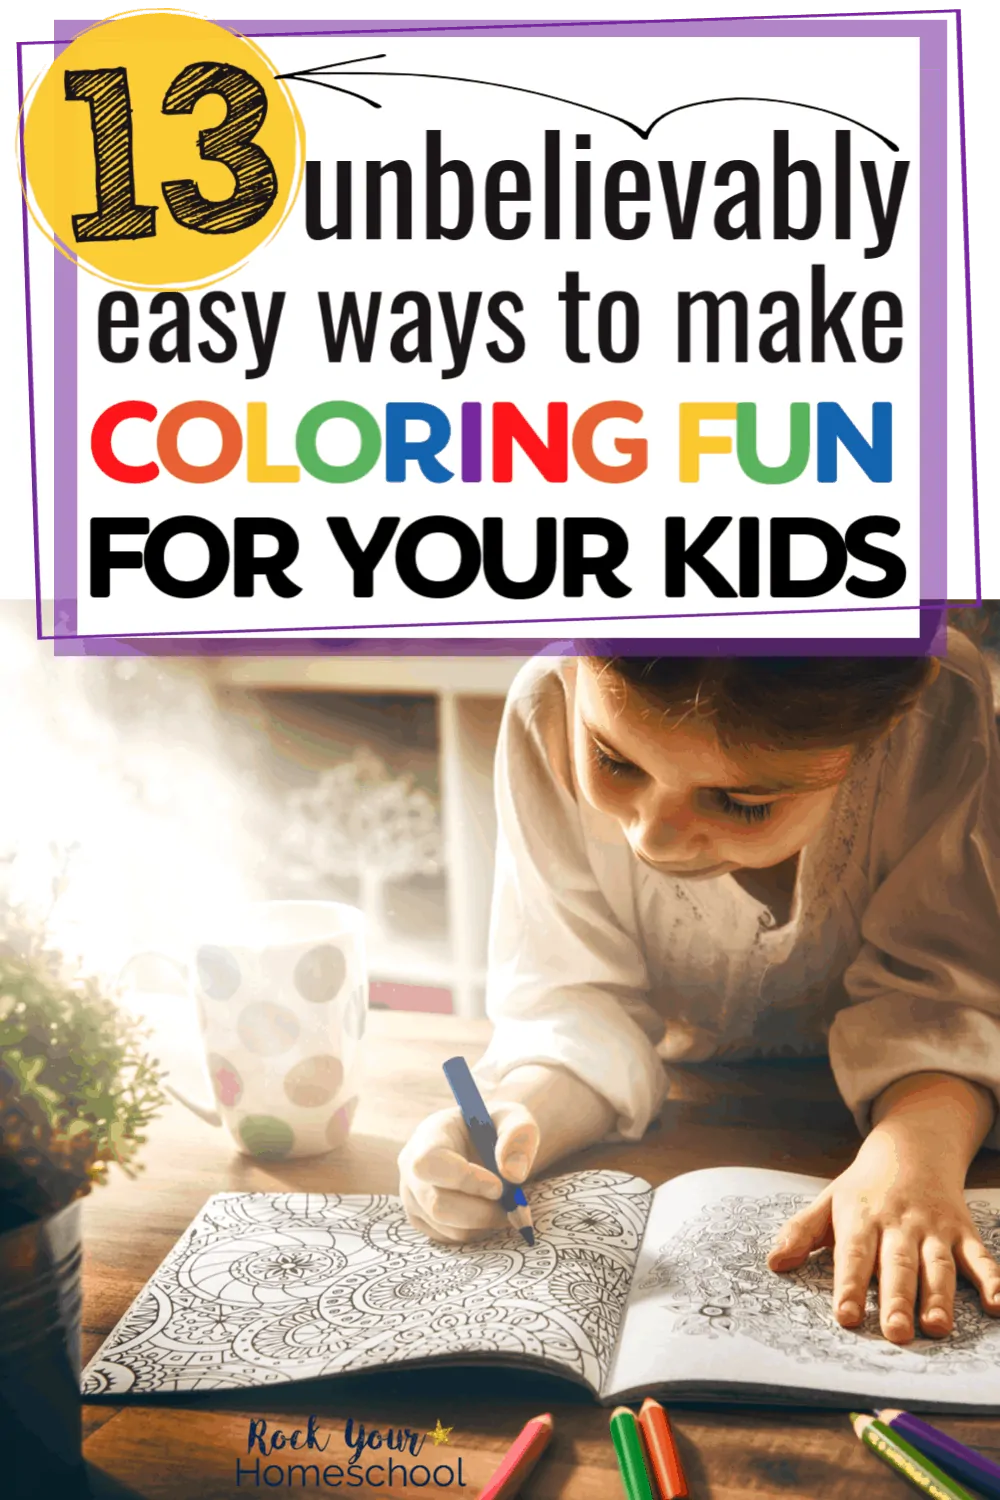 13 Unbelievably Easy Ways to Make Coloring Fun for Kids